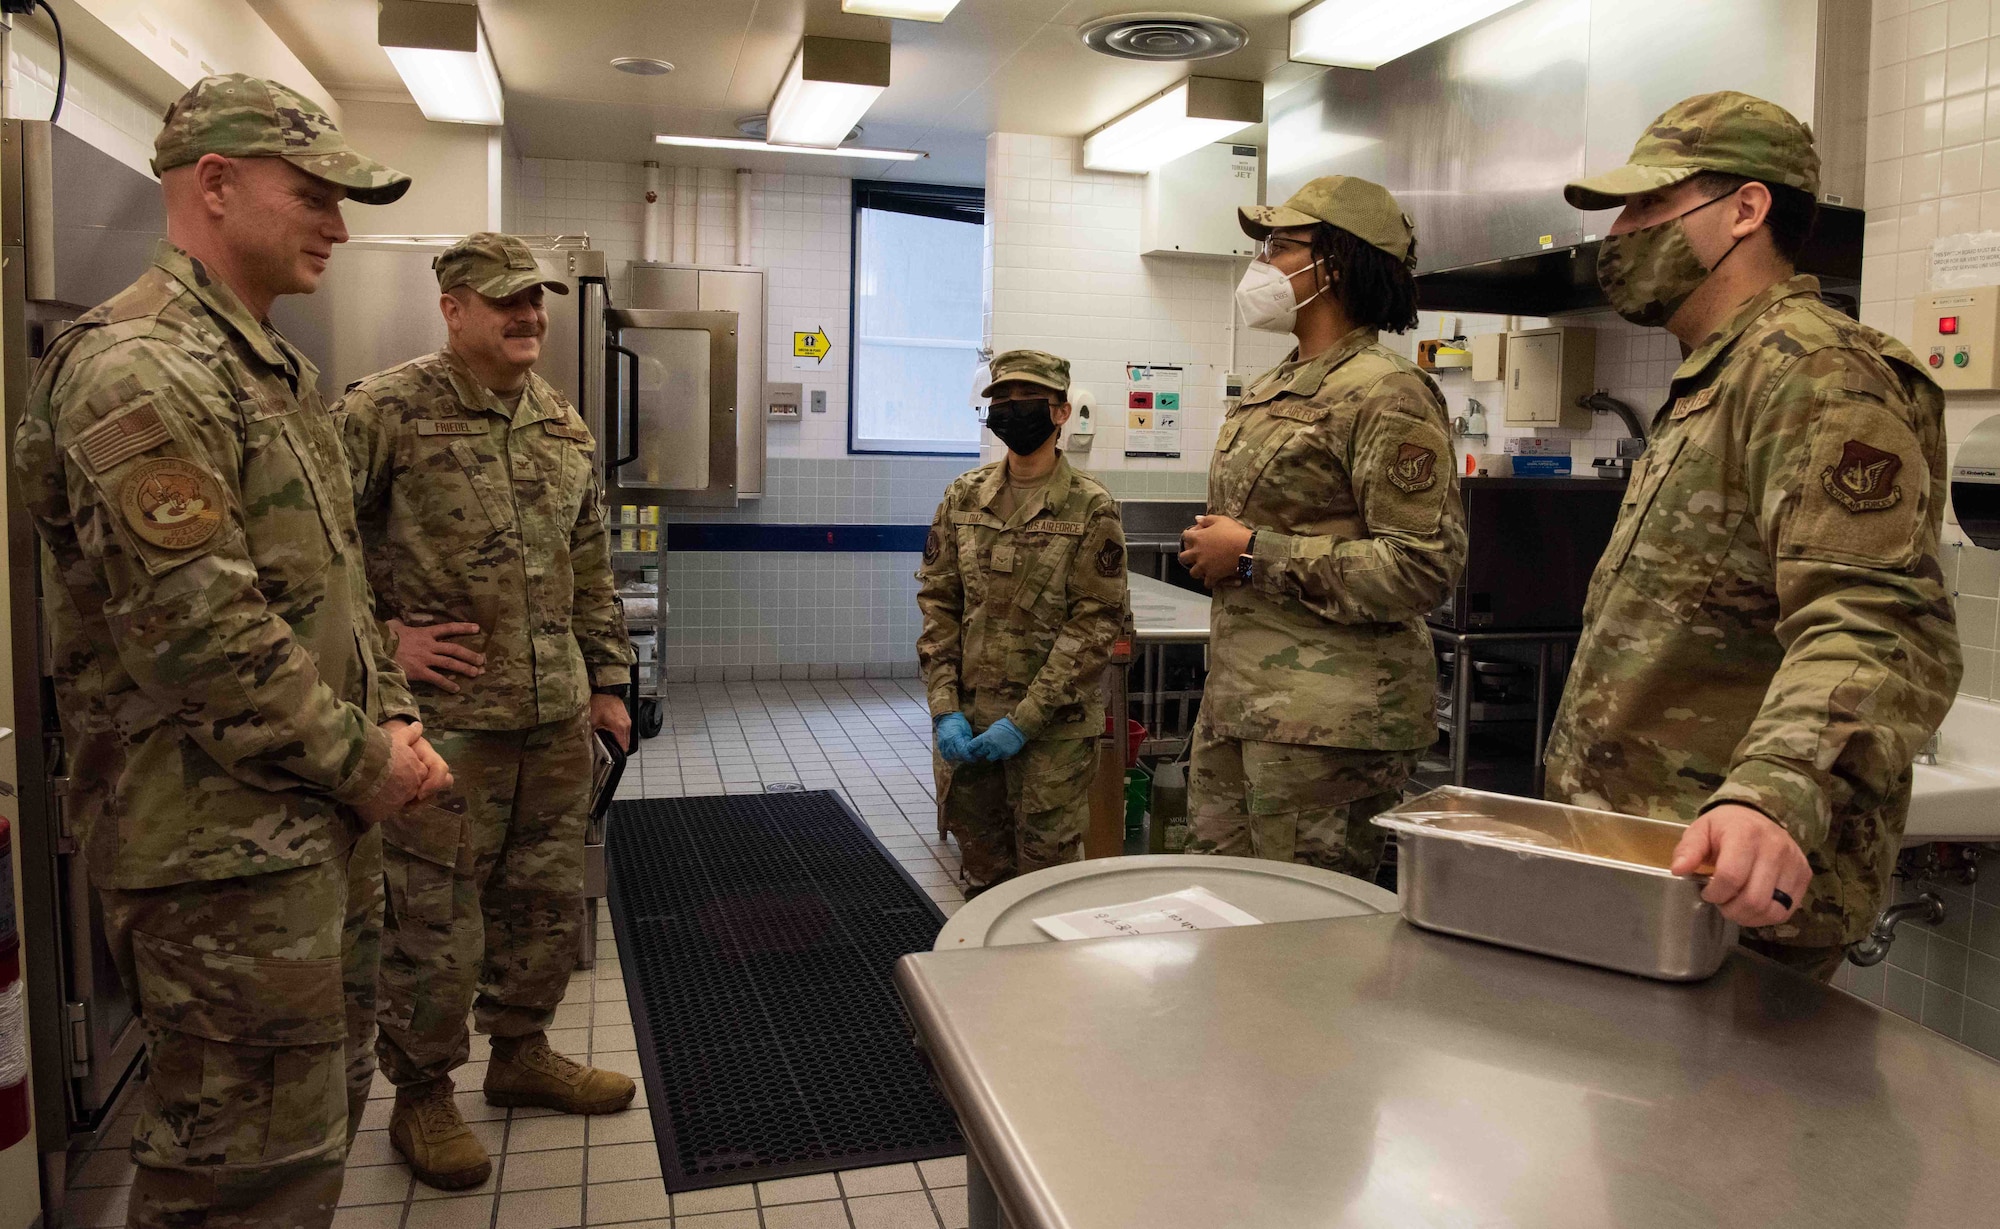 Military members talk to each other in the Falcon Feeder kitchen